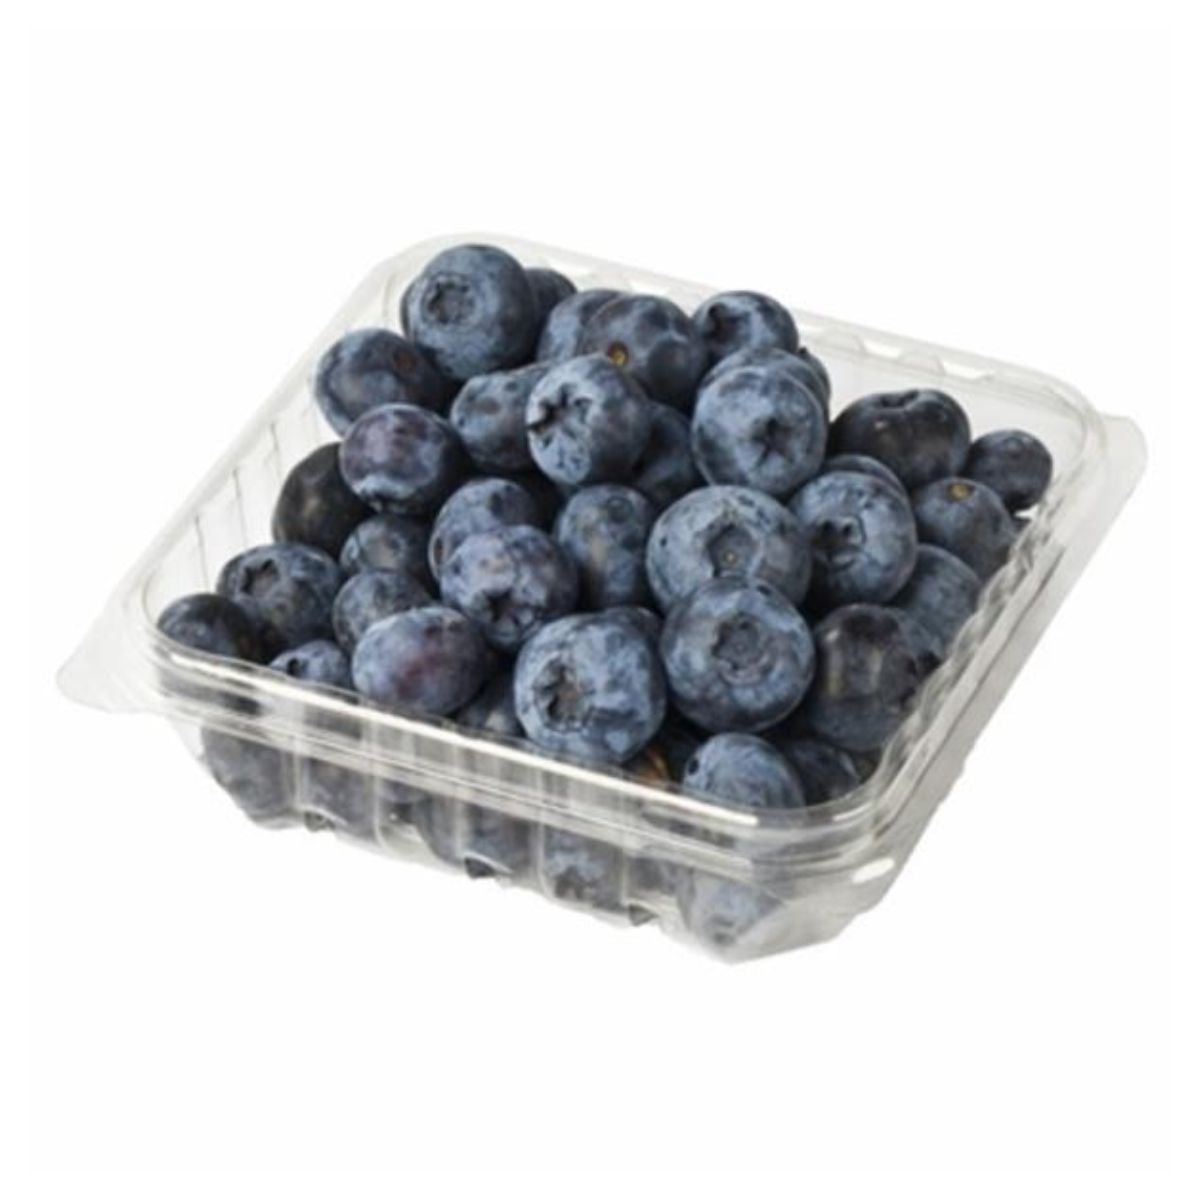 Blueberries in a Blueberrey - 125g container on a white background.